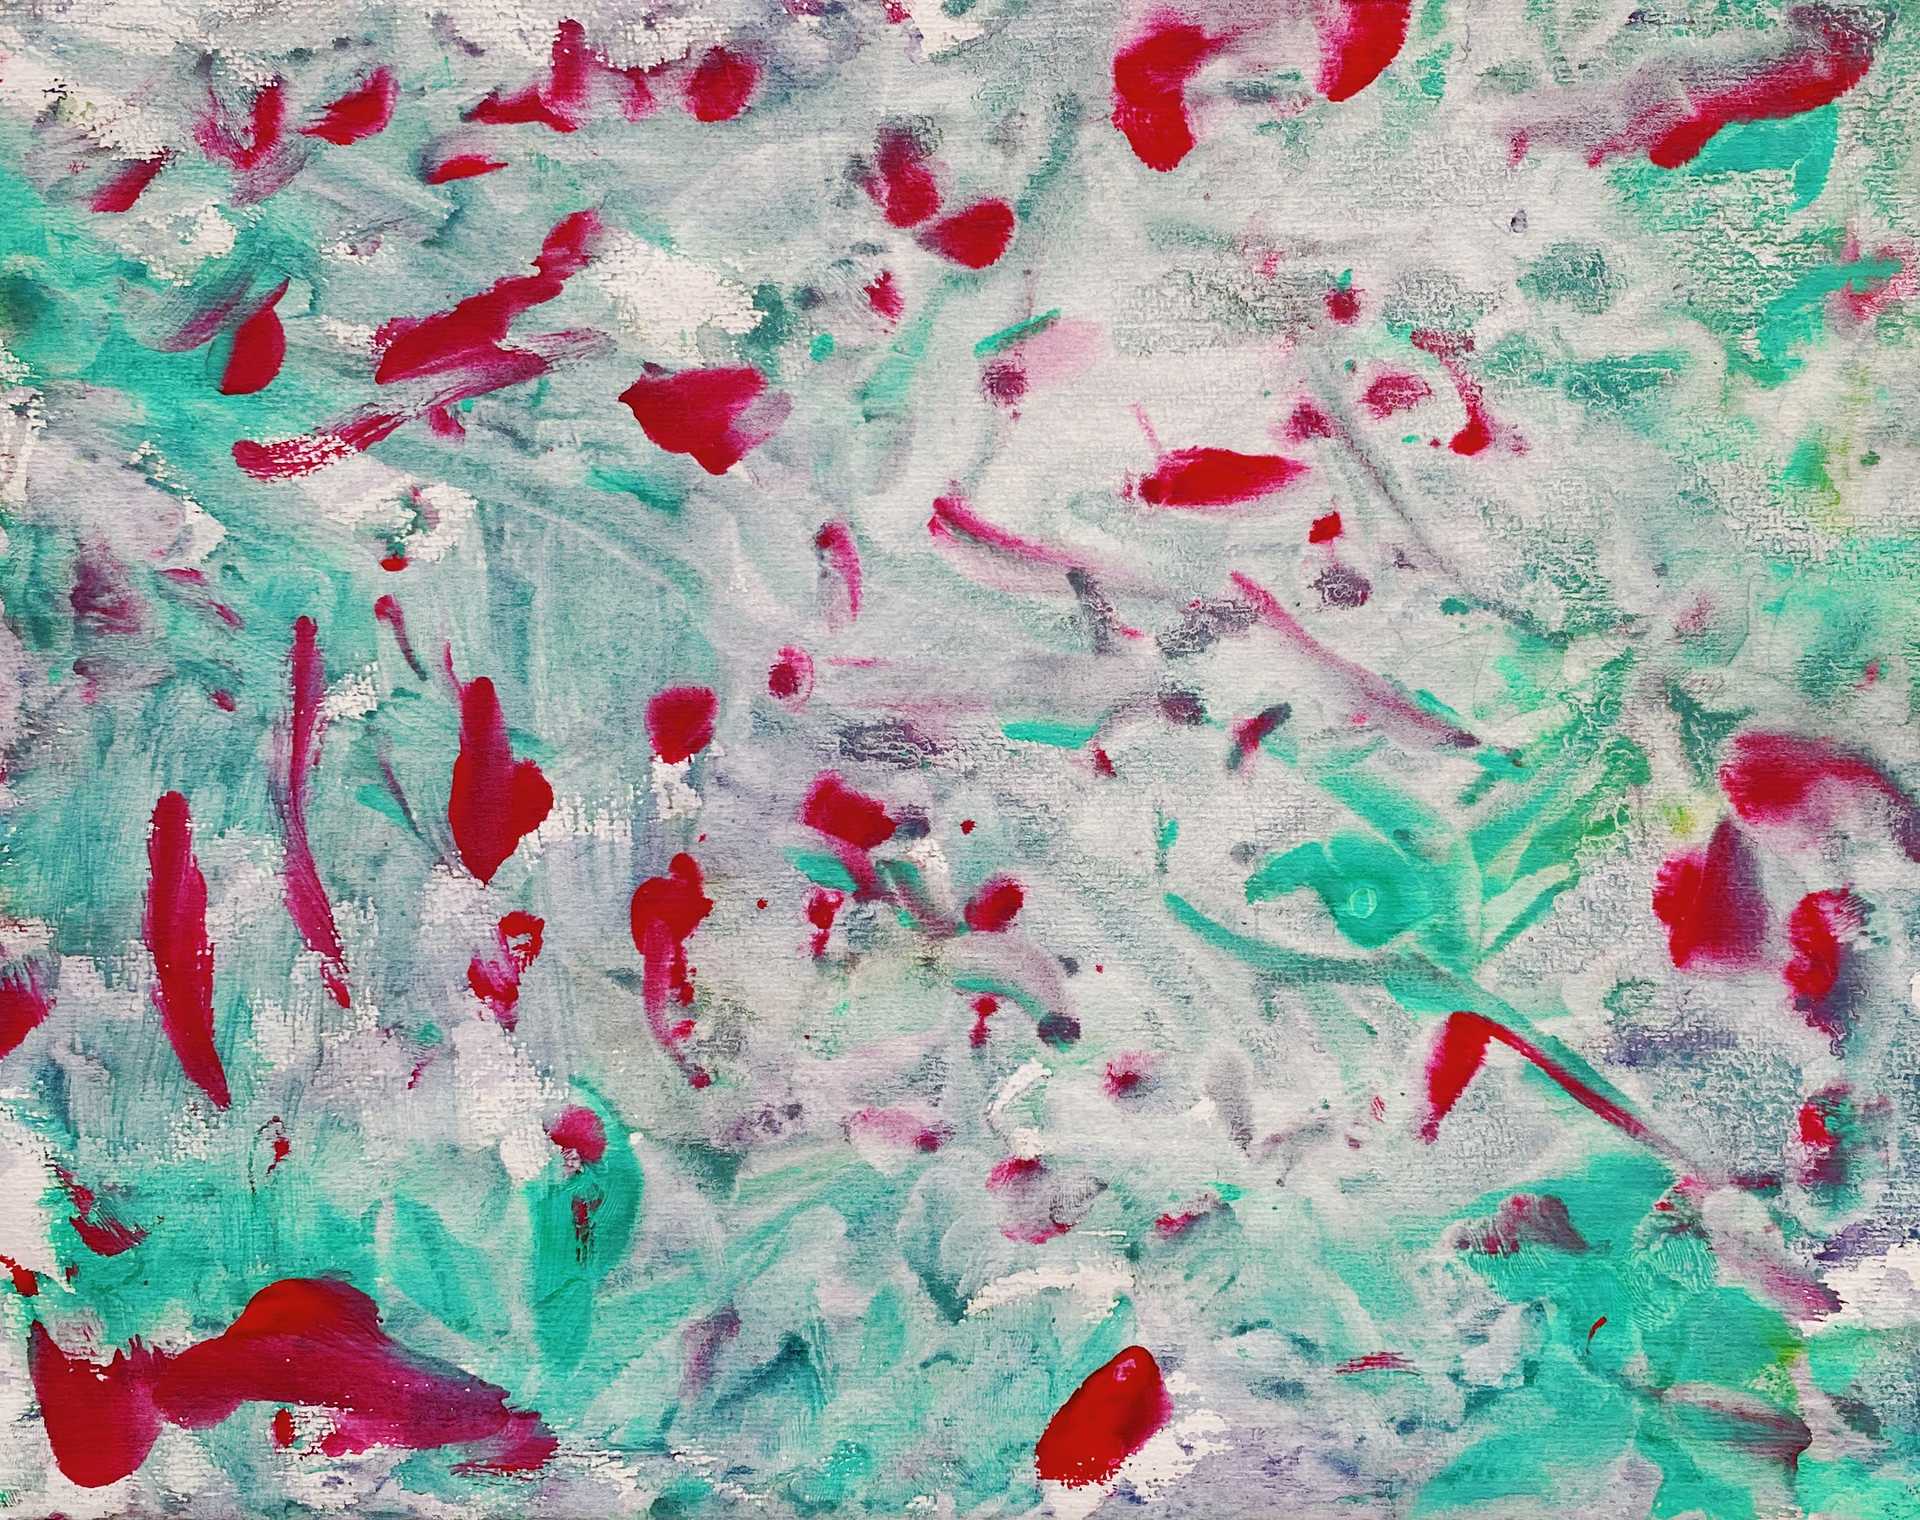 Abstract painting with mix of red, white and turquose colors